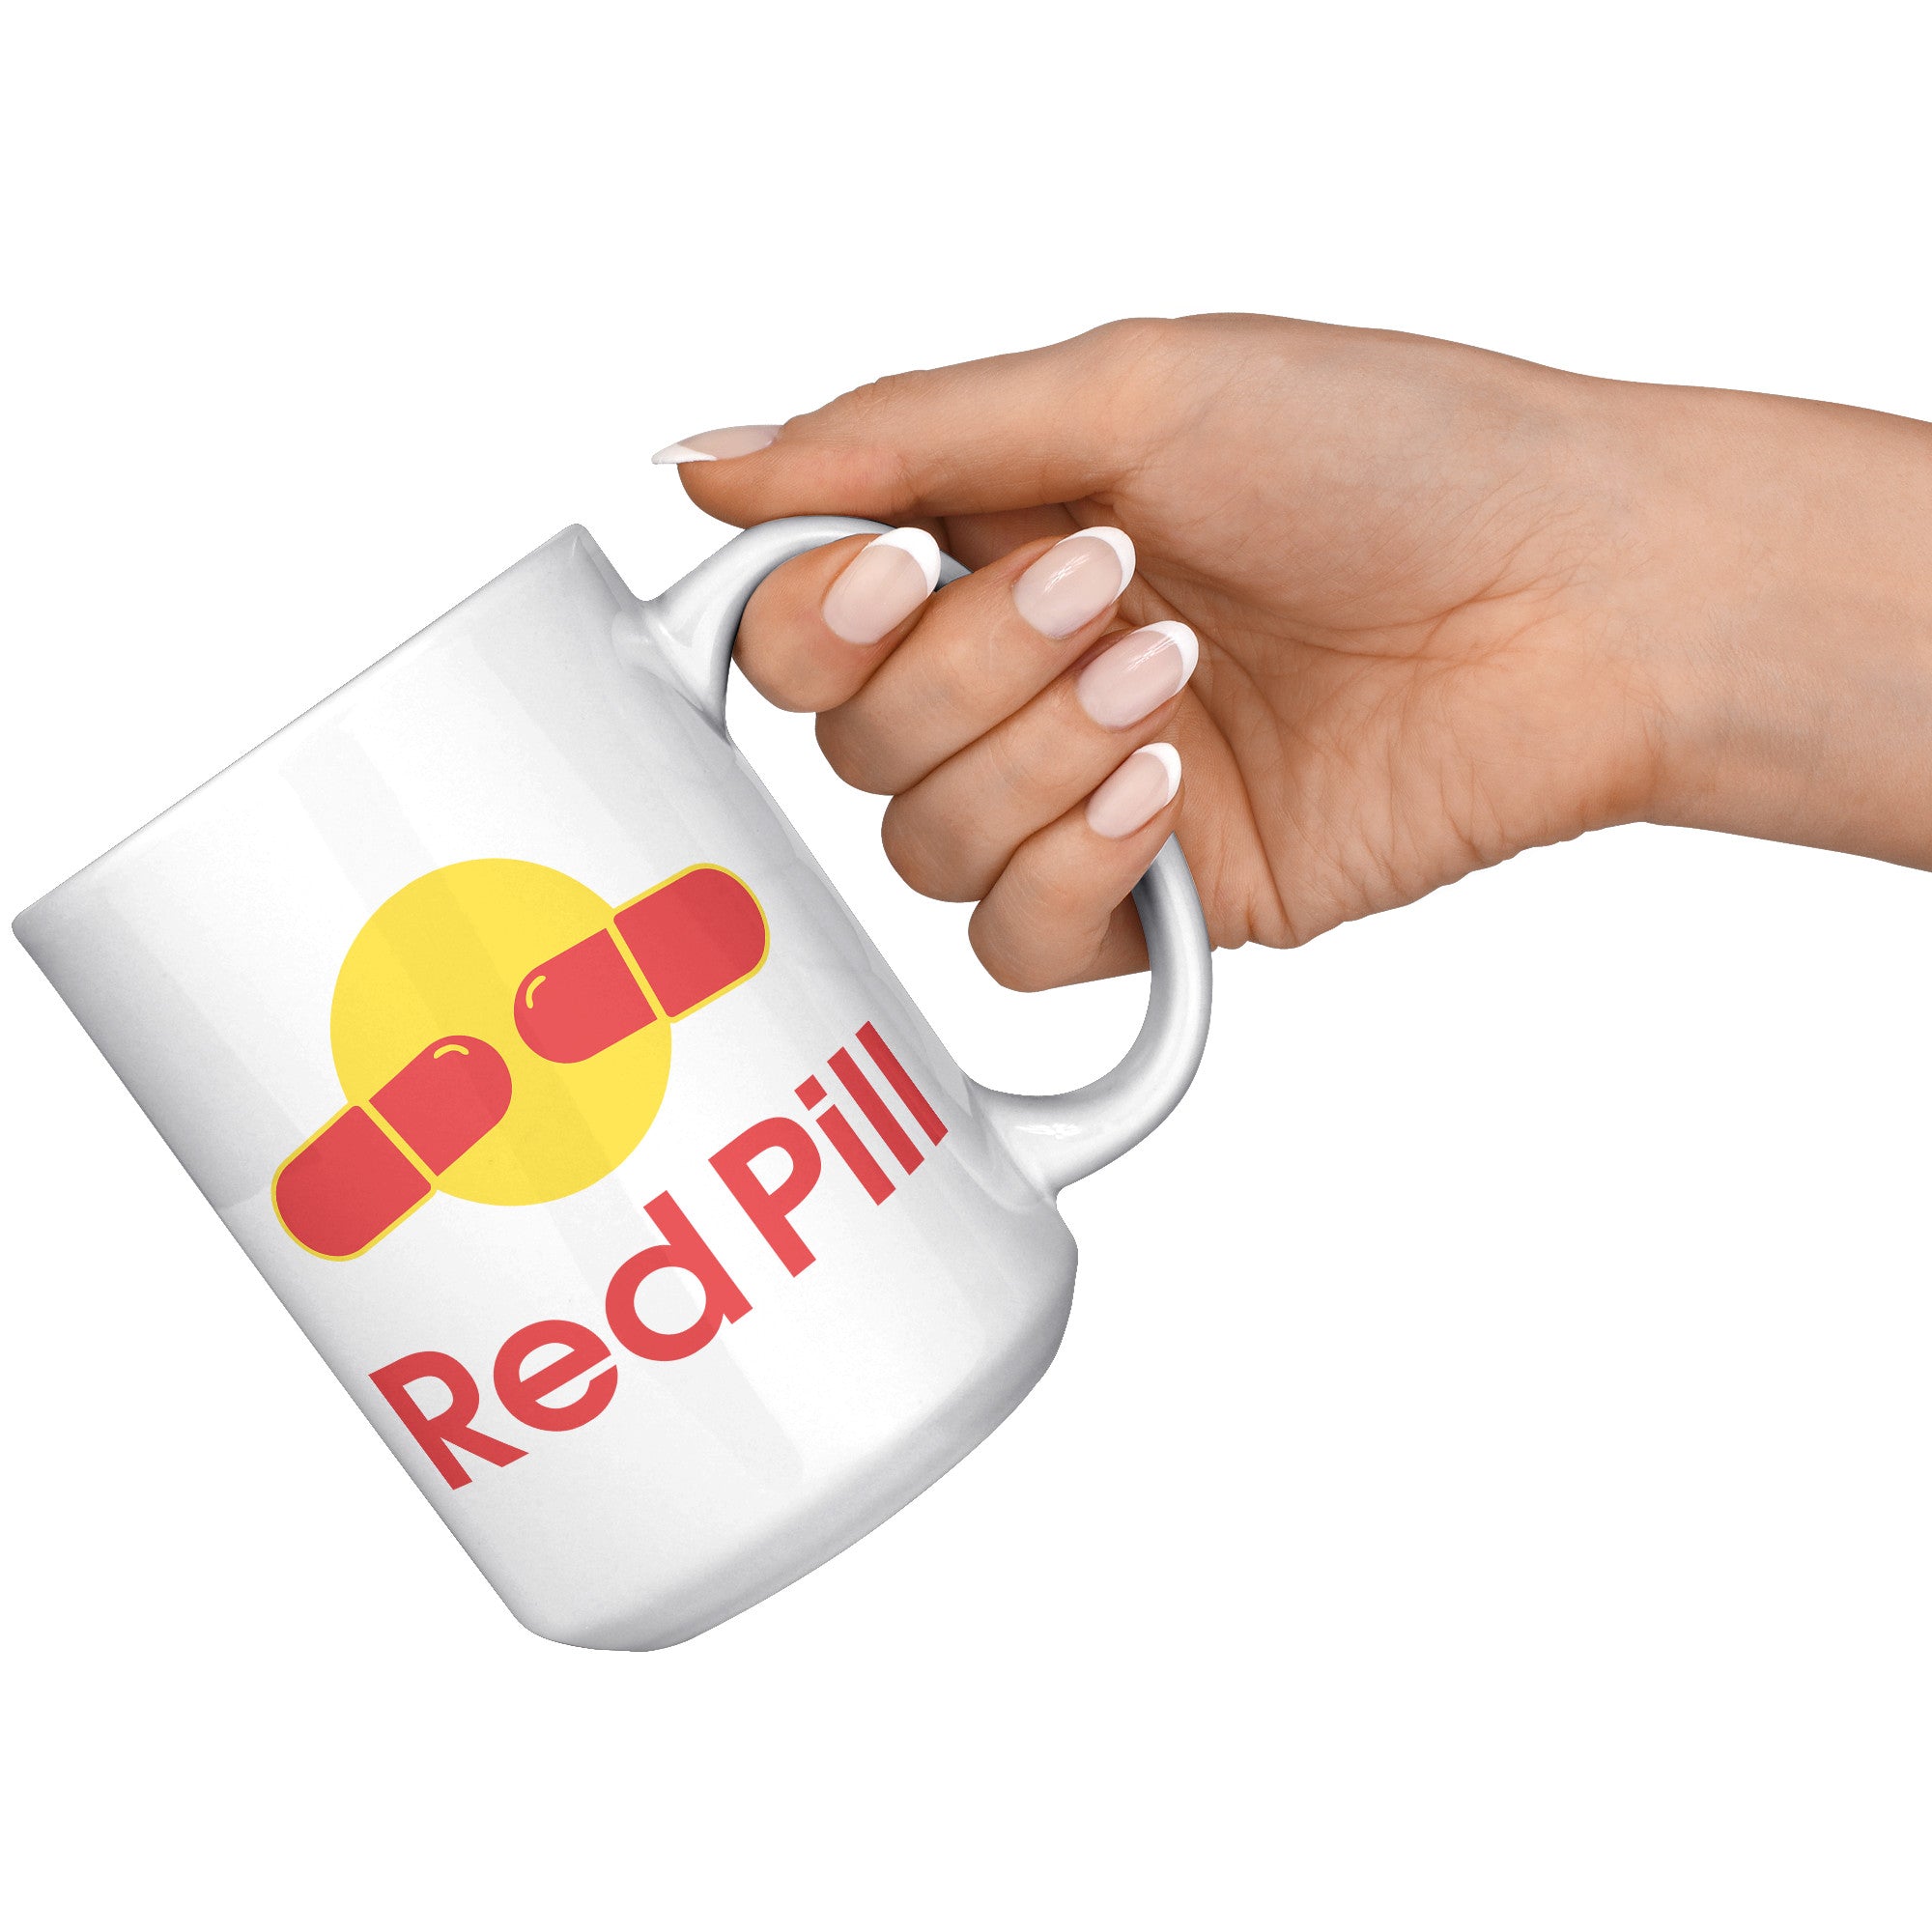 Red Pill Coffee Mug -Front/Back | Drunk America 